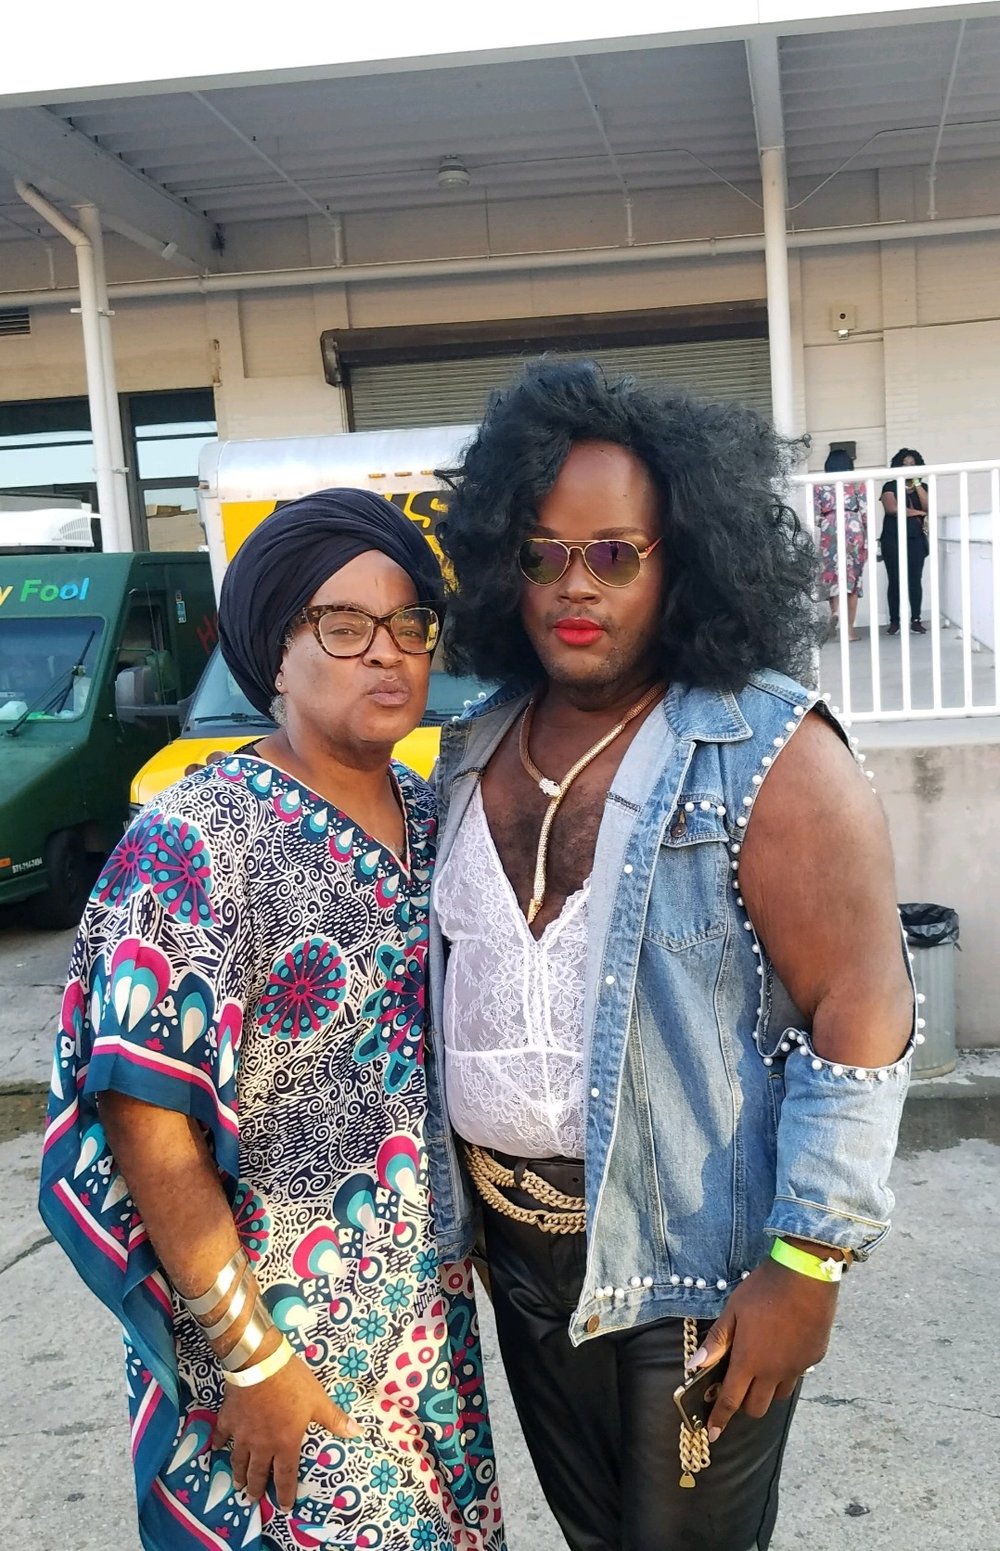 Ms. Rayceen &amp; Blessitt Shawn at HoneyGroove, a festival that celebrates LGBTQ performing artists, visual artists, creatives and entrepreneurs.